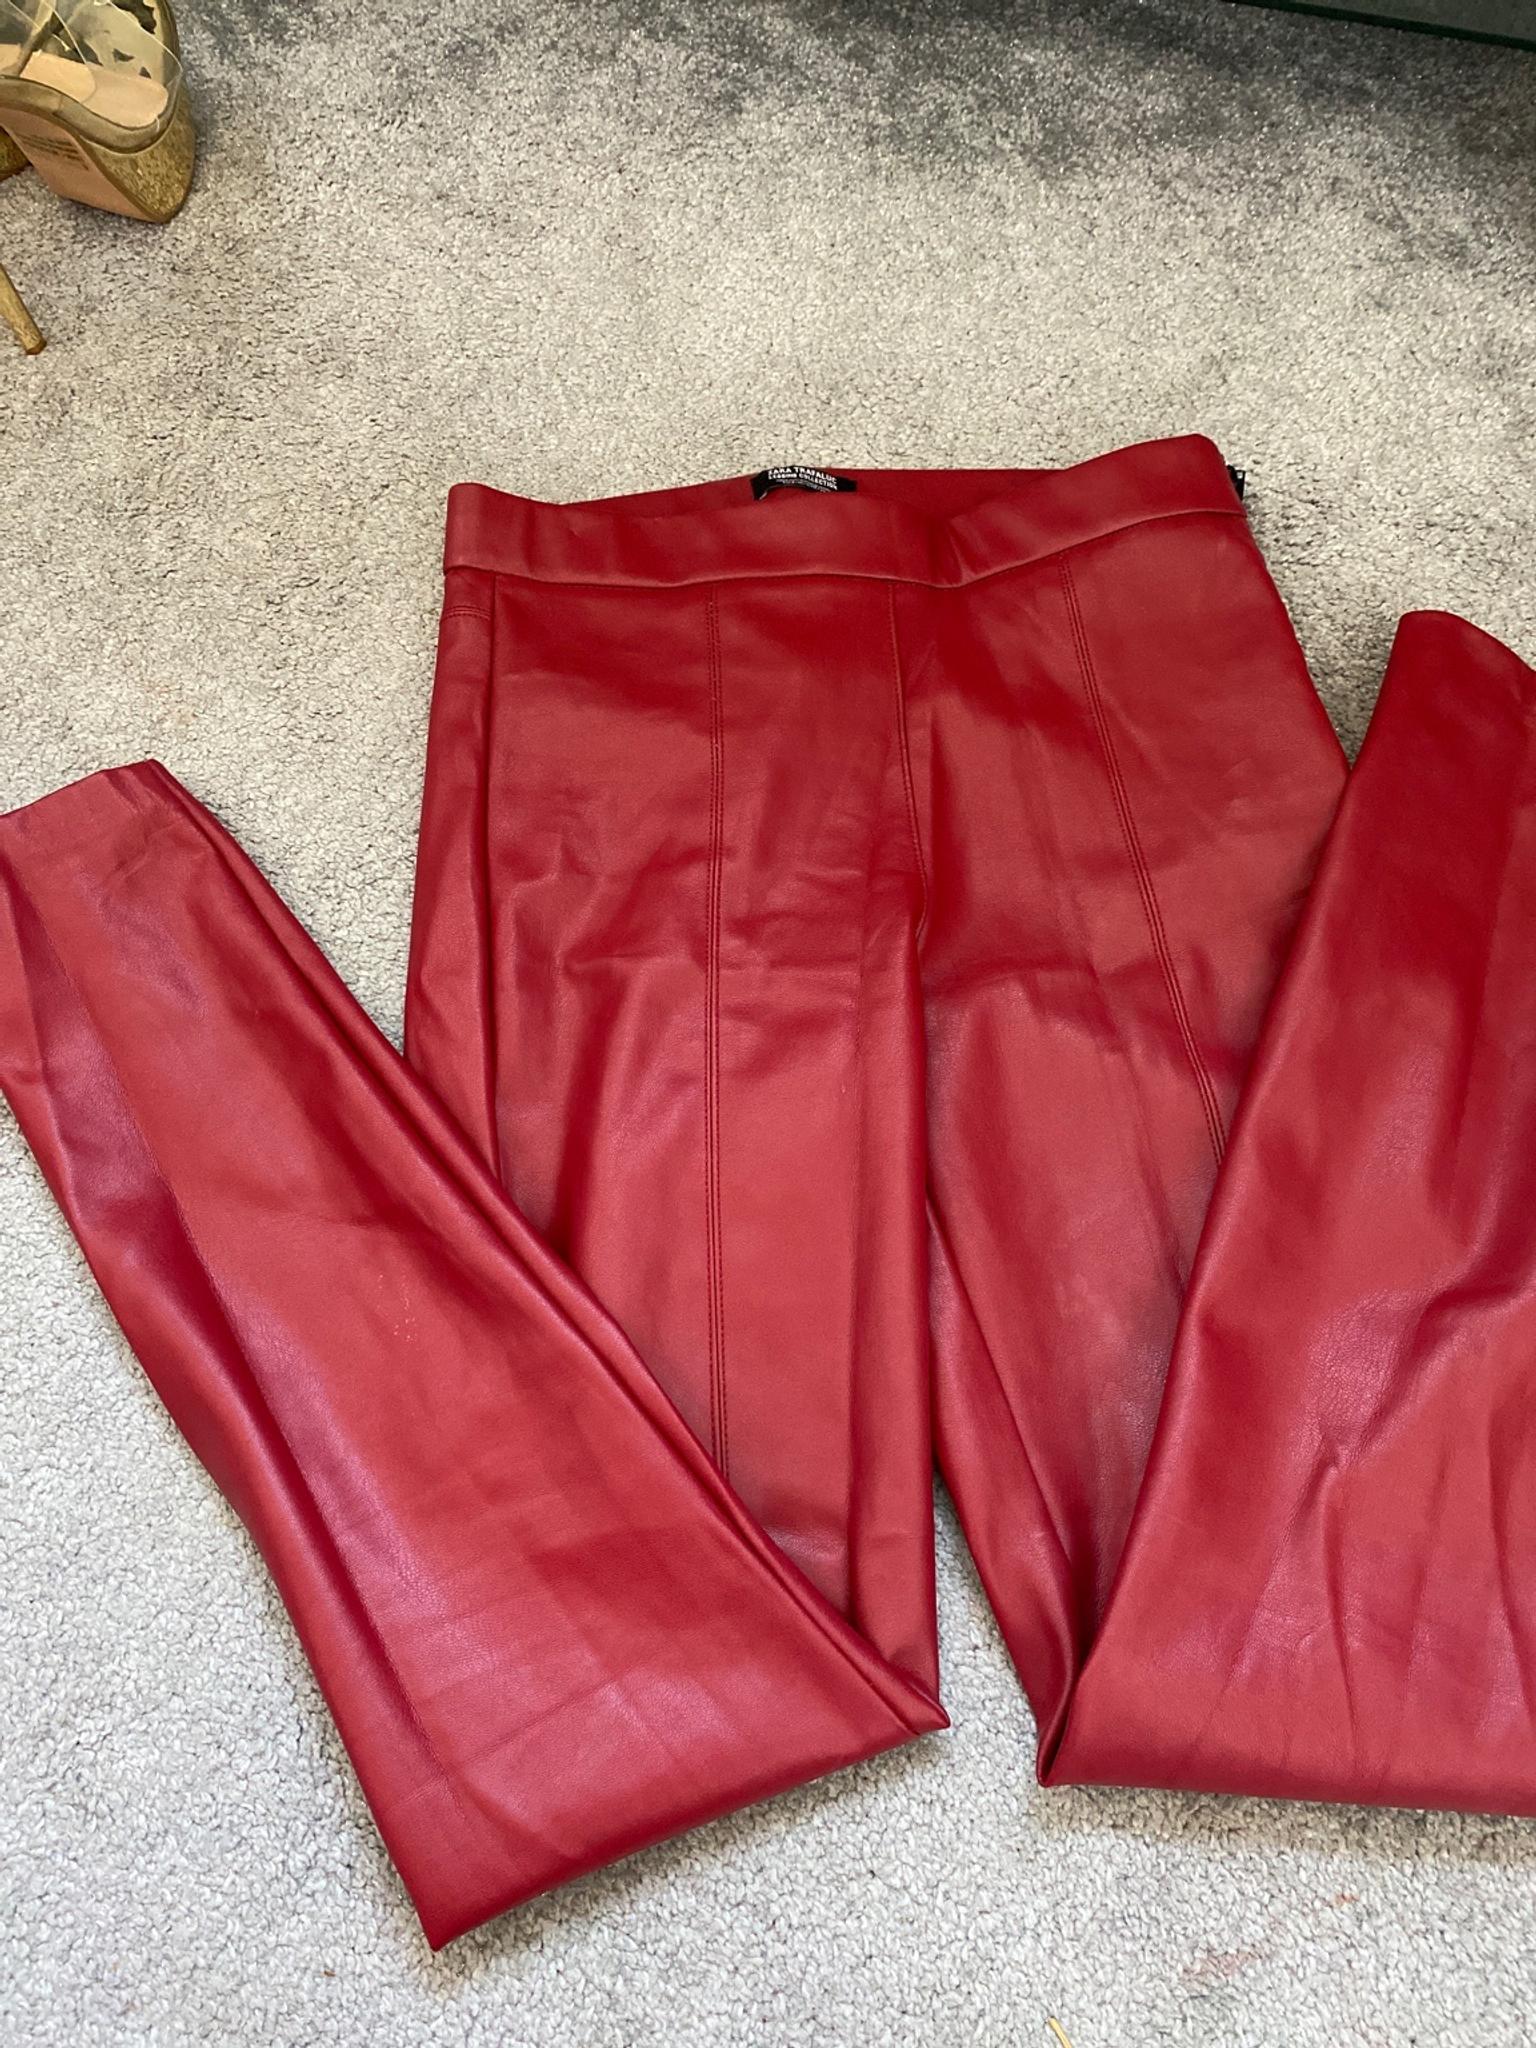 zara red leather trousers